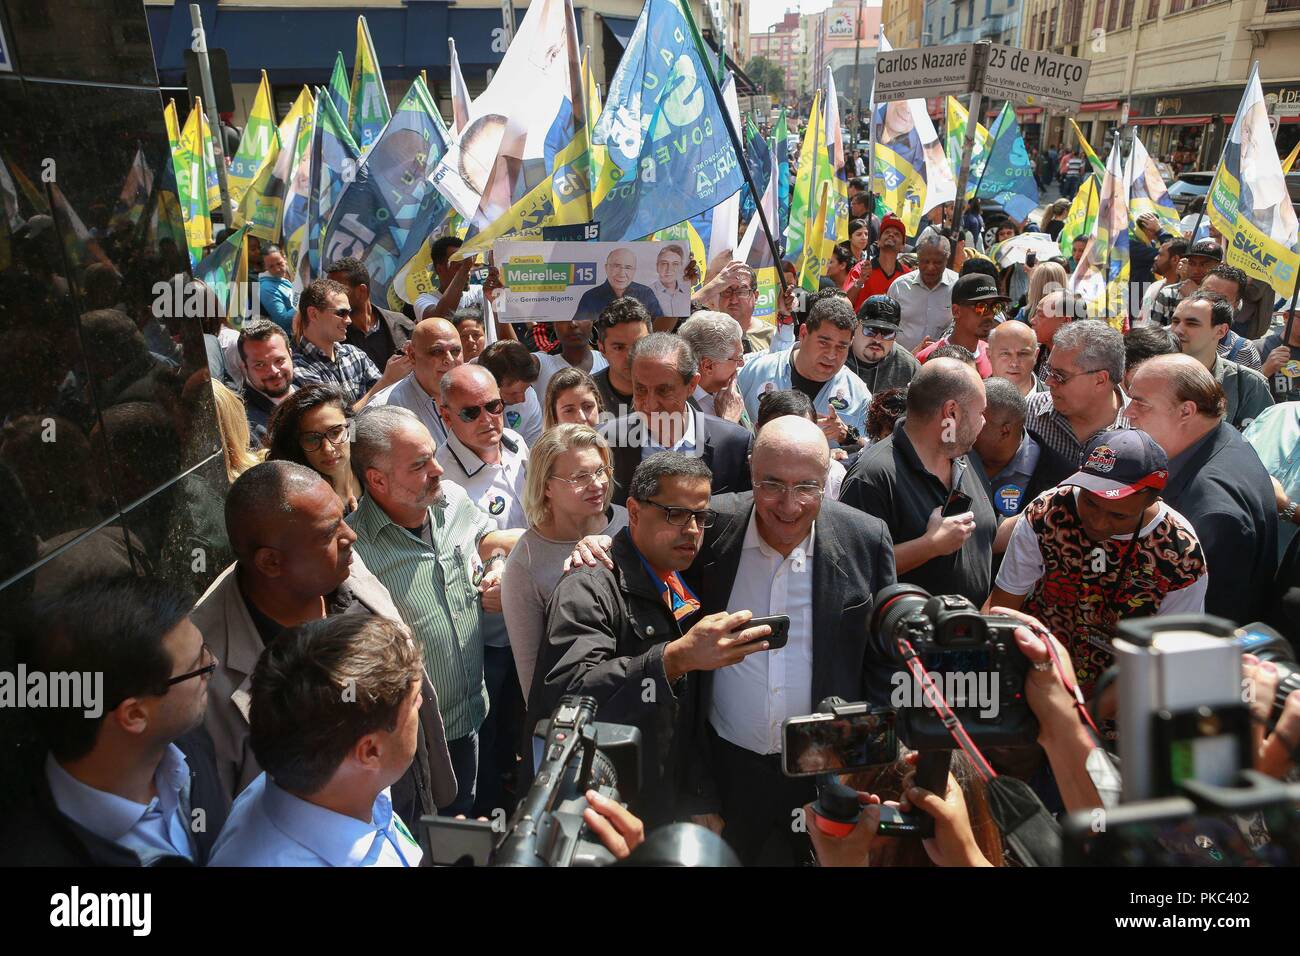 Sao Paulo, Brazil. 12th Sep, 2018. the candidate for the presidency of the republic of Brazil Henrique Meirelles (C) does a campaign walk in the popular commerce region on March 25th Street in Sao Paulo on September 12, 2018 Credit: Dario Oliveira/ZUMA Wire/Alamy Live News Stock Photo